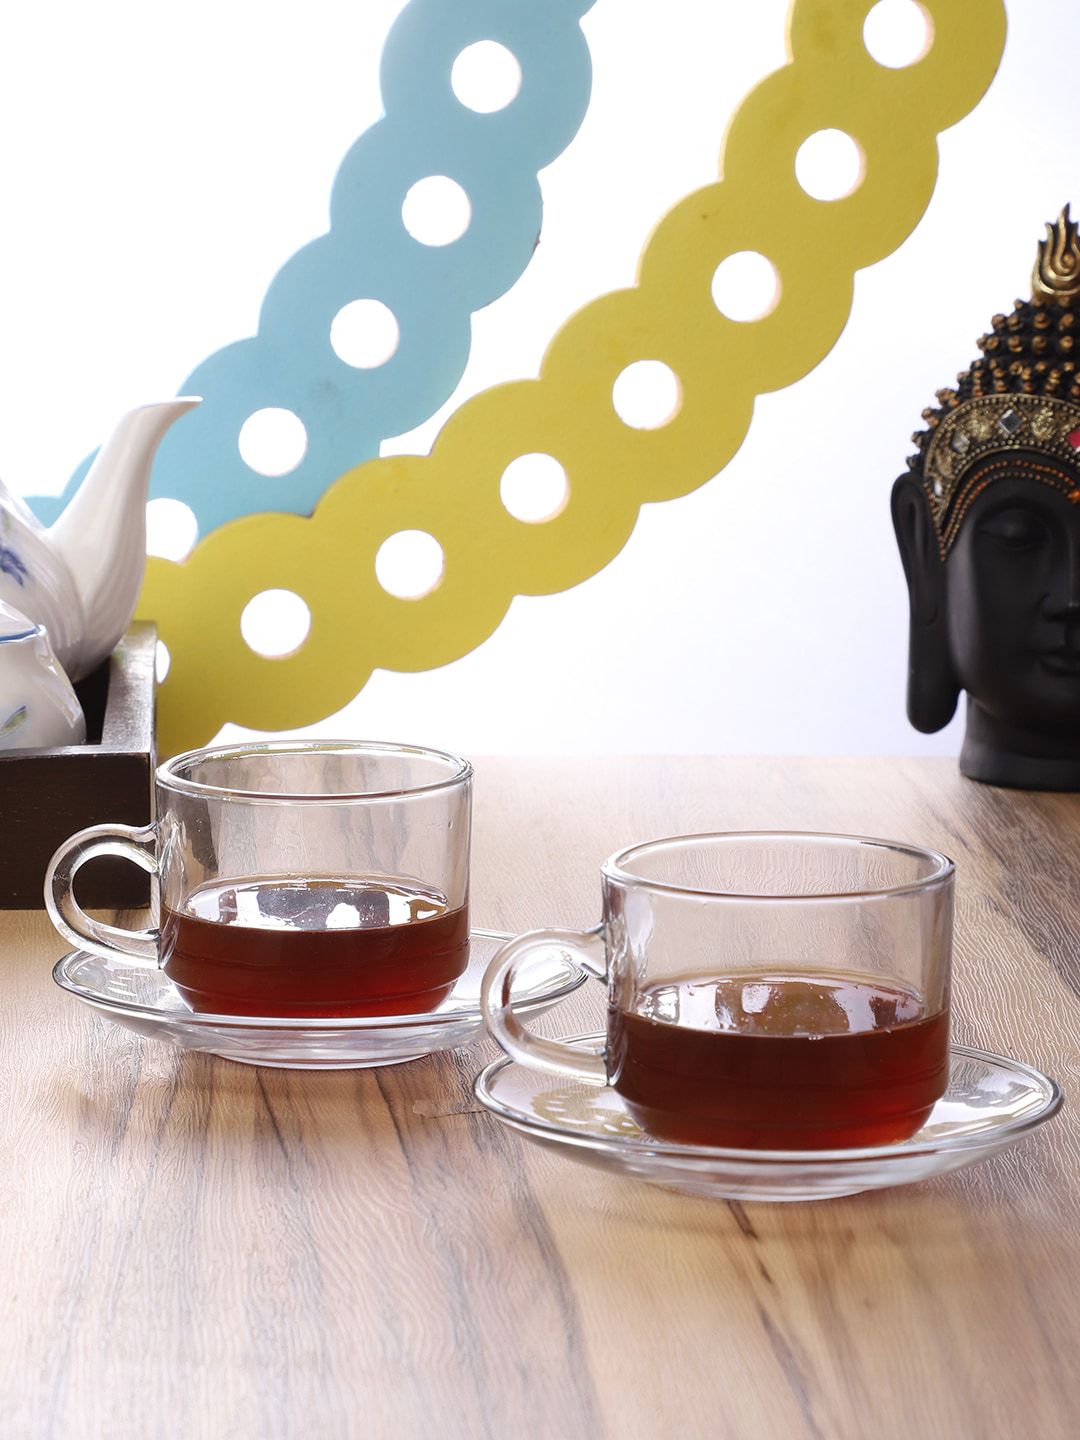 ceradeco 12 Pieces Transparent Printed Glass Cups and Saucers Set Price in India